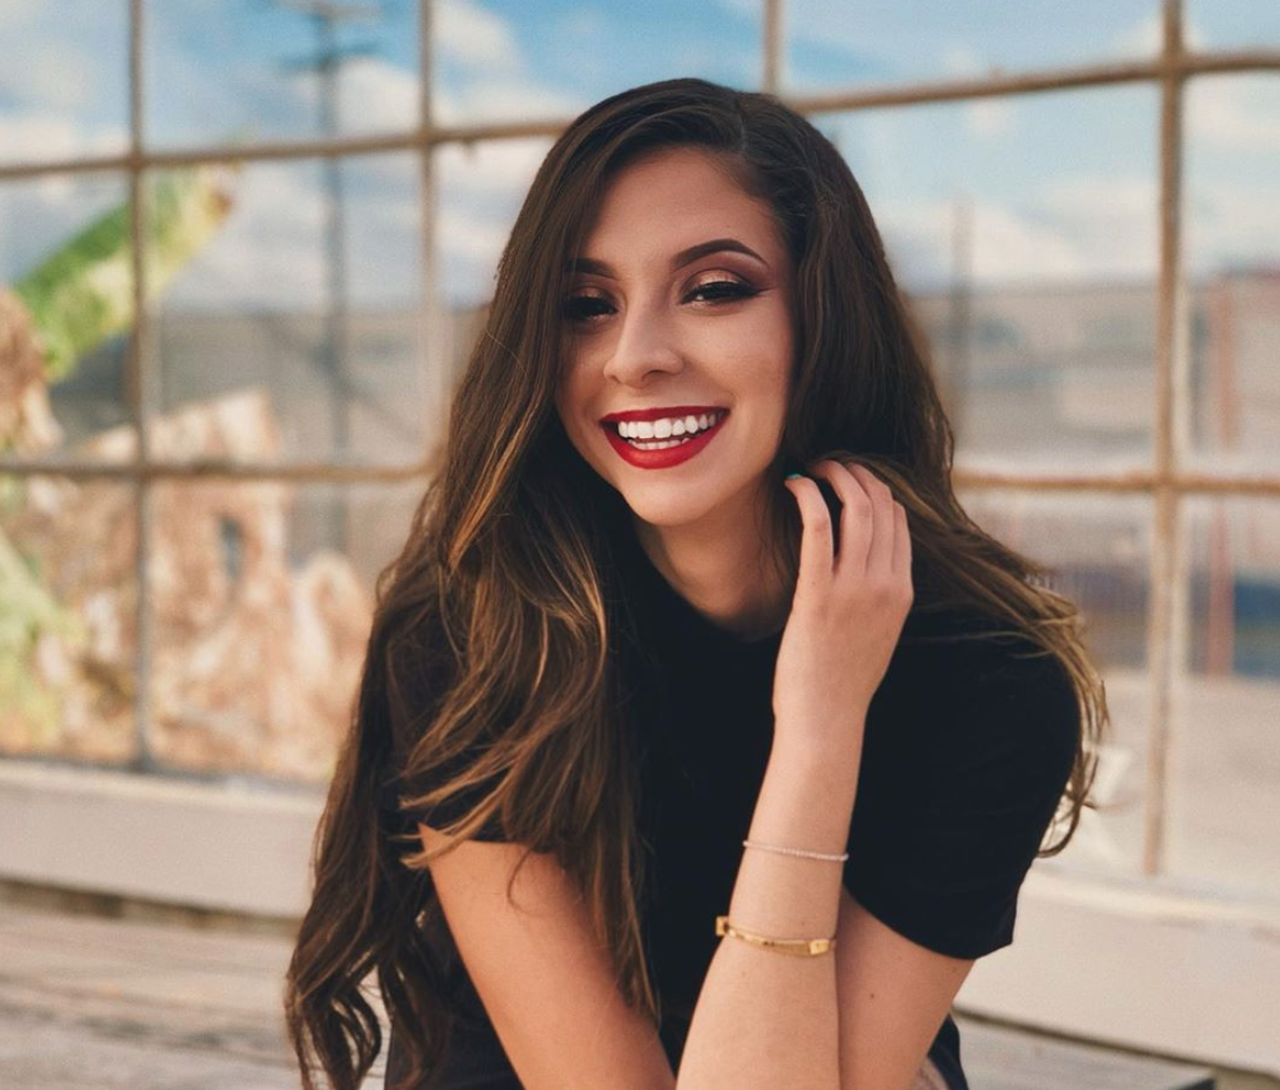 Maddie Skye
Madalyn Mendoza — known to most as her online name of Maddy Skye — is the unofficial face of mySA.com. The San Antonio native has a Twitter personality that’s earned her a following of locals who gas her up and flock to her defense when people are rude. What can we say? She’s a woman of the people!
Photo via Instagram / maddyskye10